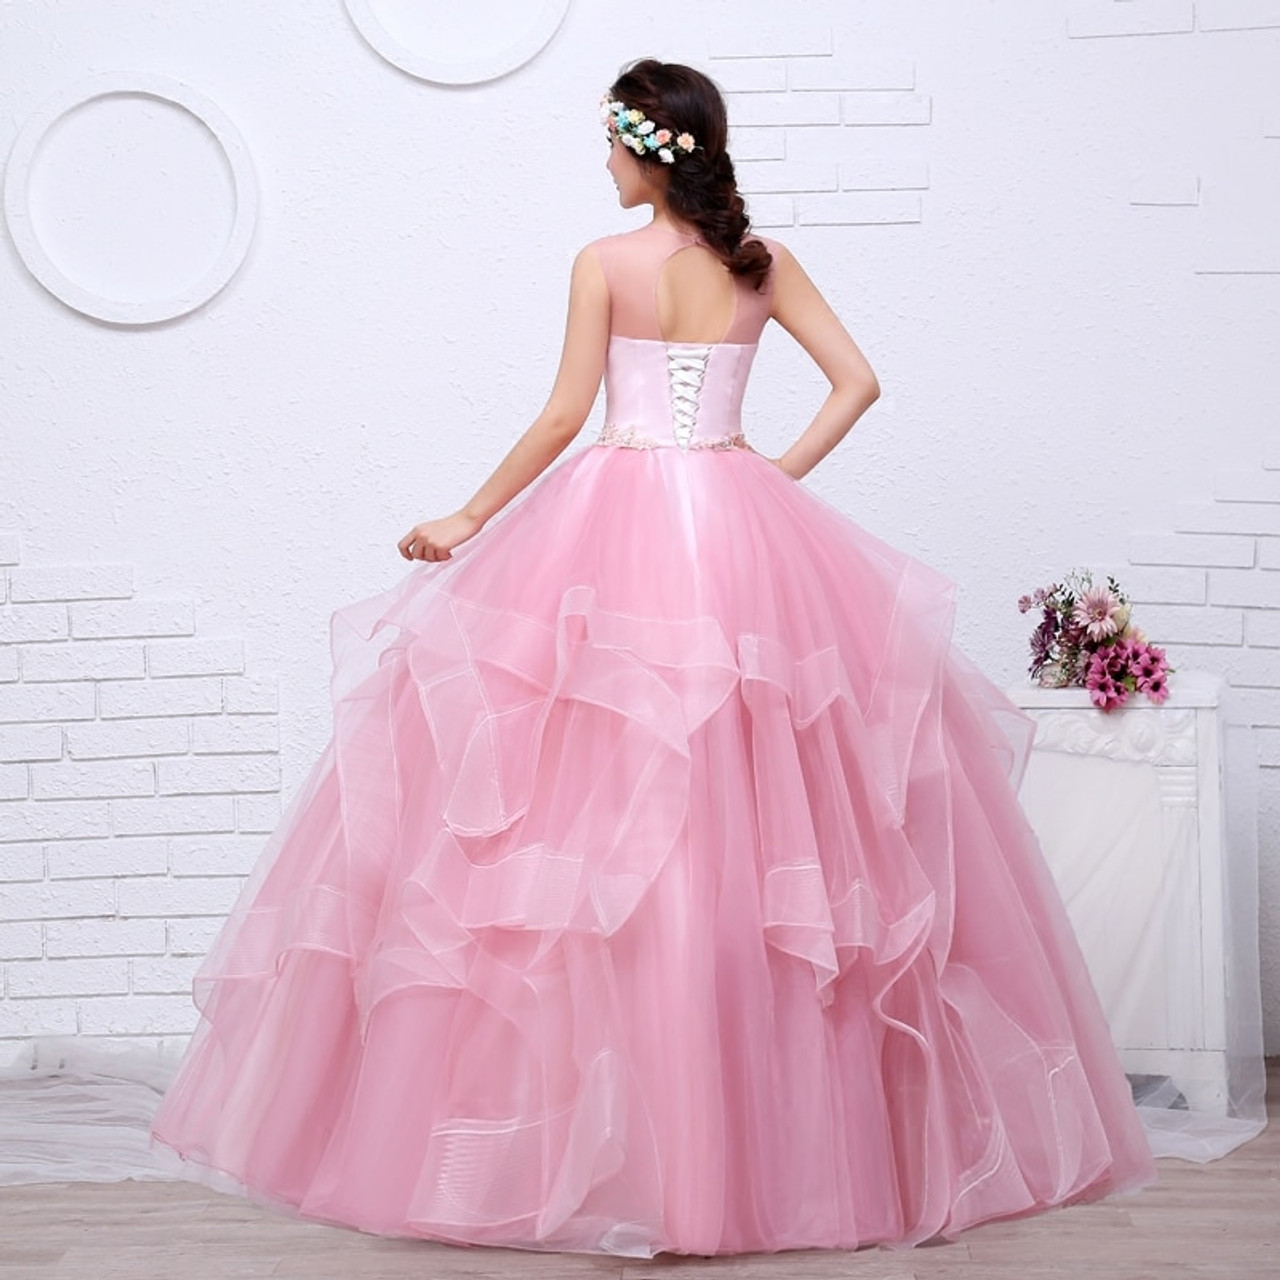 MISS36 - Luxurious Pink Floral Embroidery Beaded Princess Ball Style Wedding  Dresses Bride's Toast Evening Dress